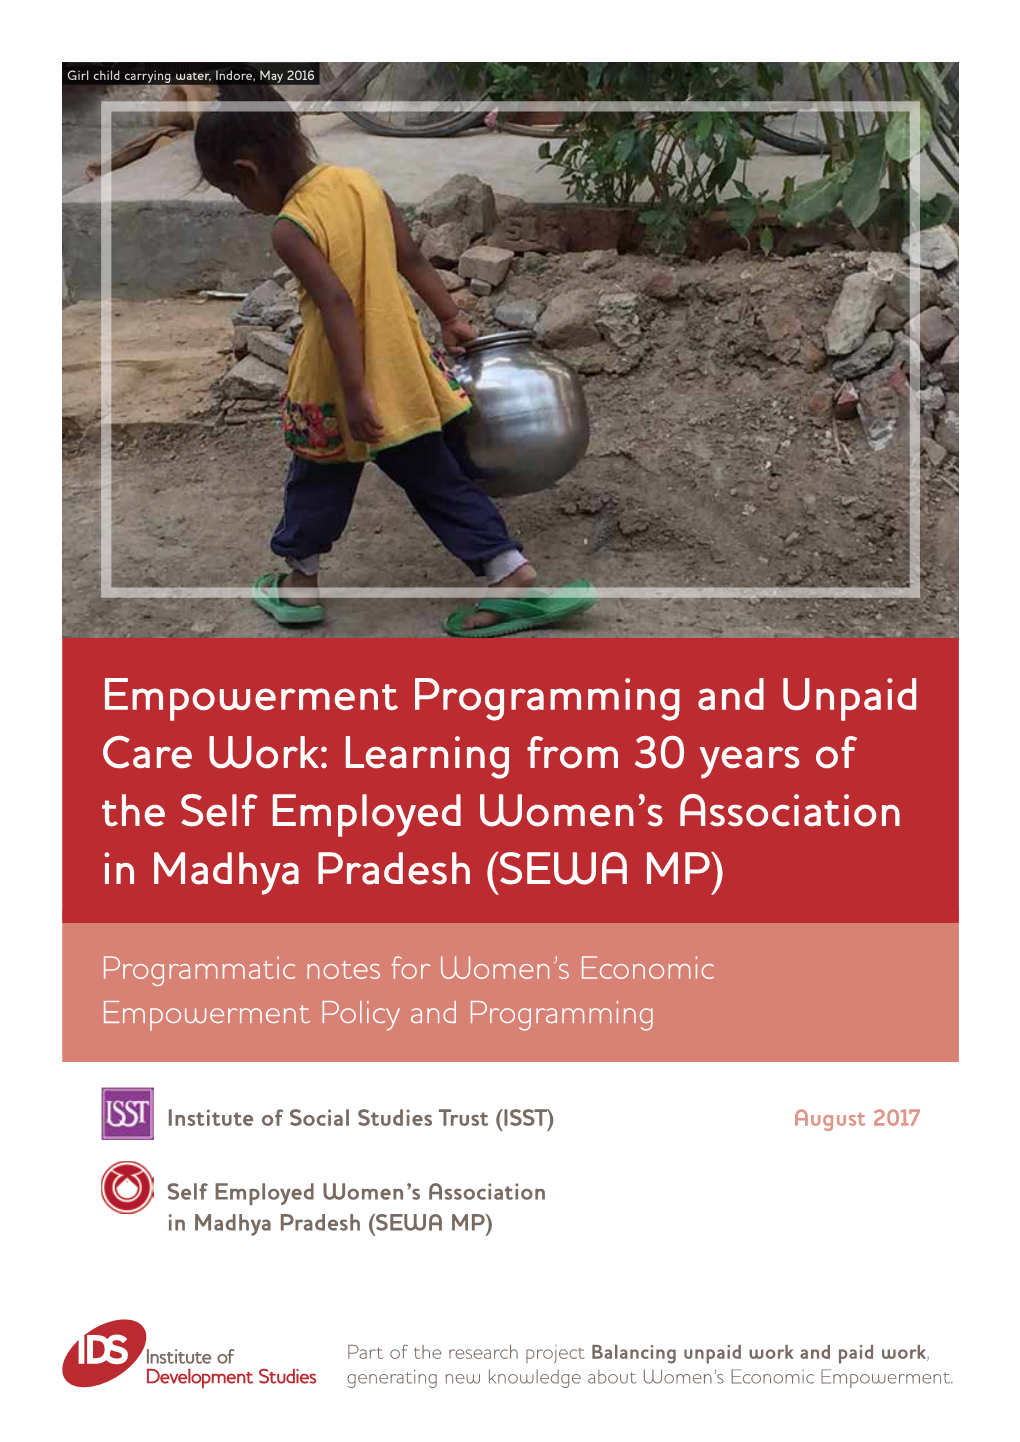 Empowerment Programming and Unpaid Care Work: Learning from 30 Years of the Self Employed Women’S Association in Madhya Pradesh (SEWA MP)